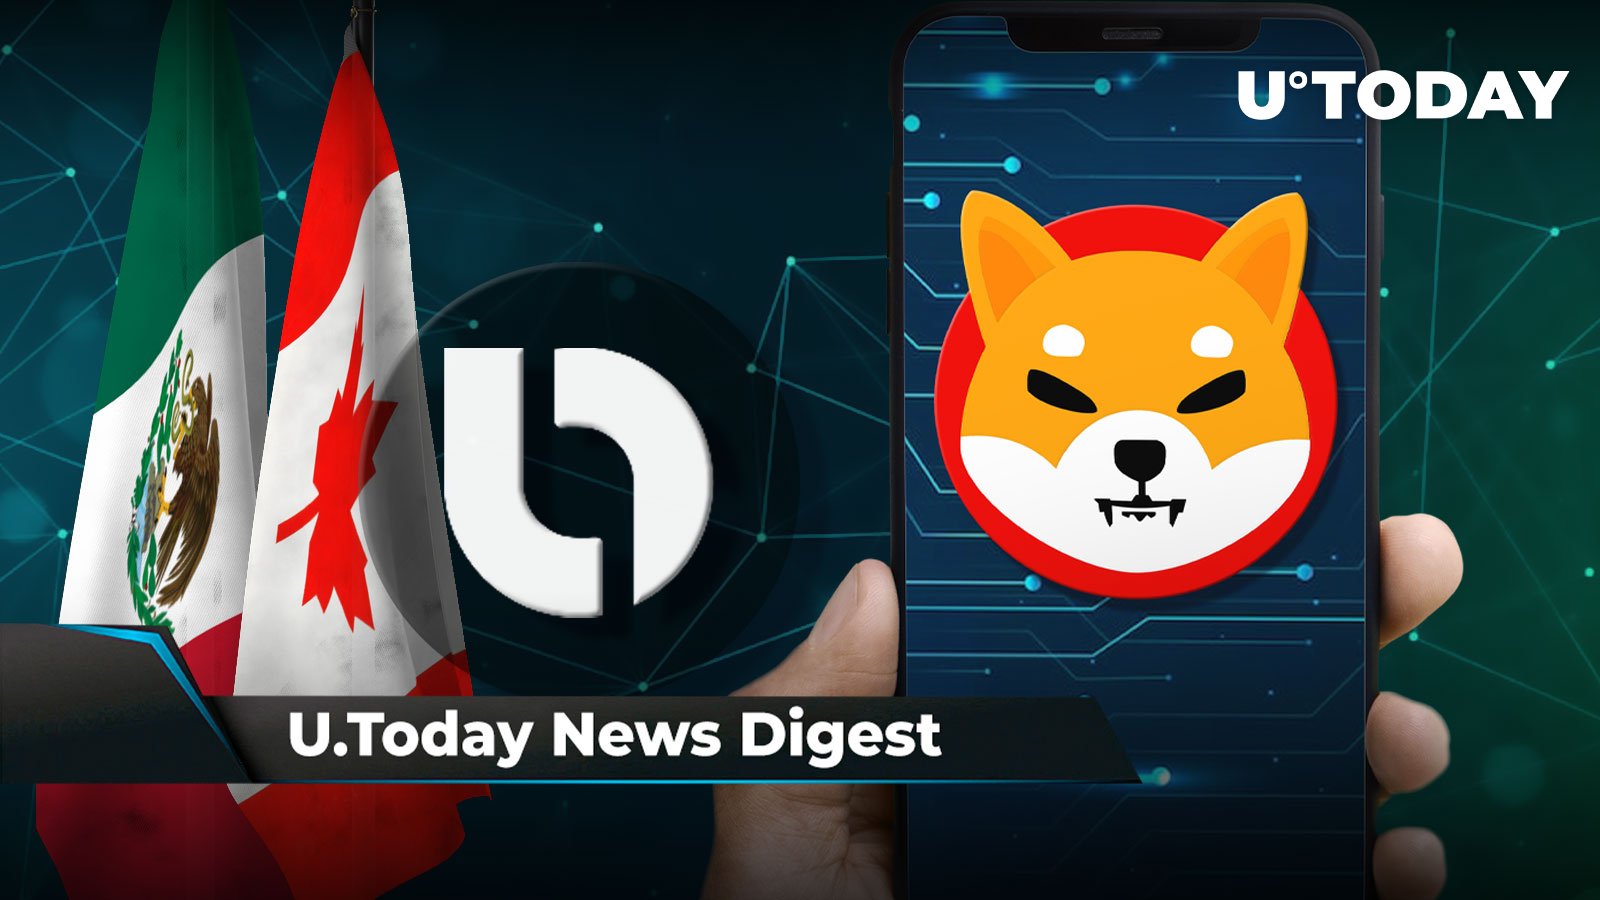 SHIB Payments May Be Available to 650 Million Users, Ripple’s Partner Launches Crypto Remittances Between Mexico and Canada: Crypto News Digest by U.Today